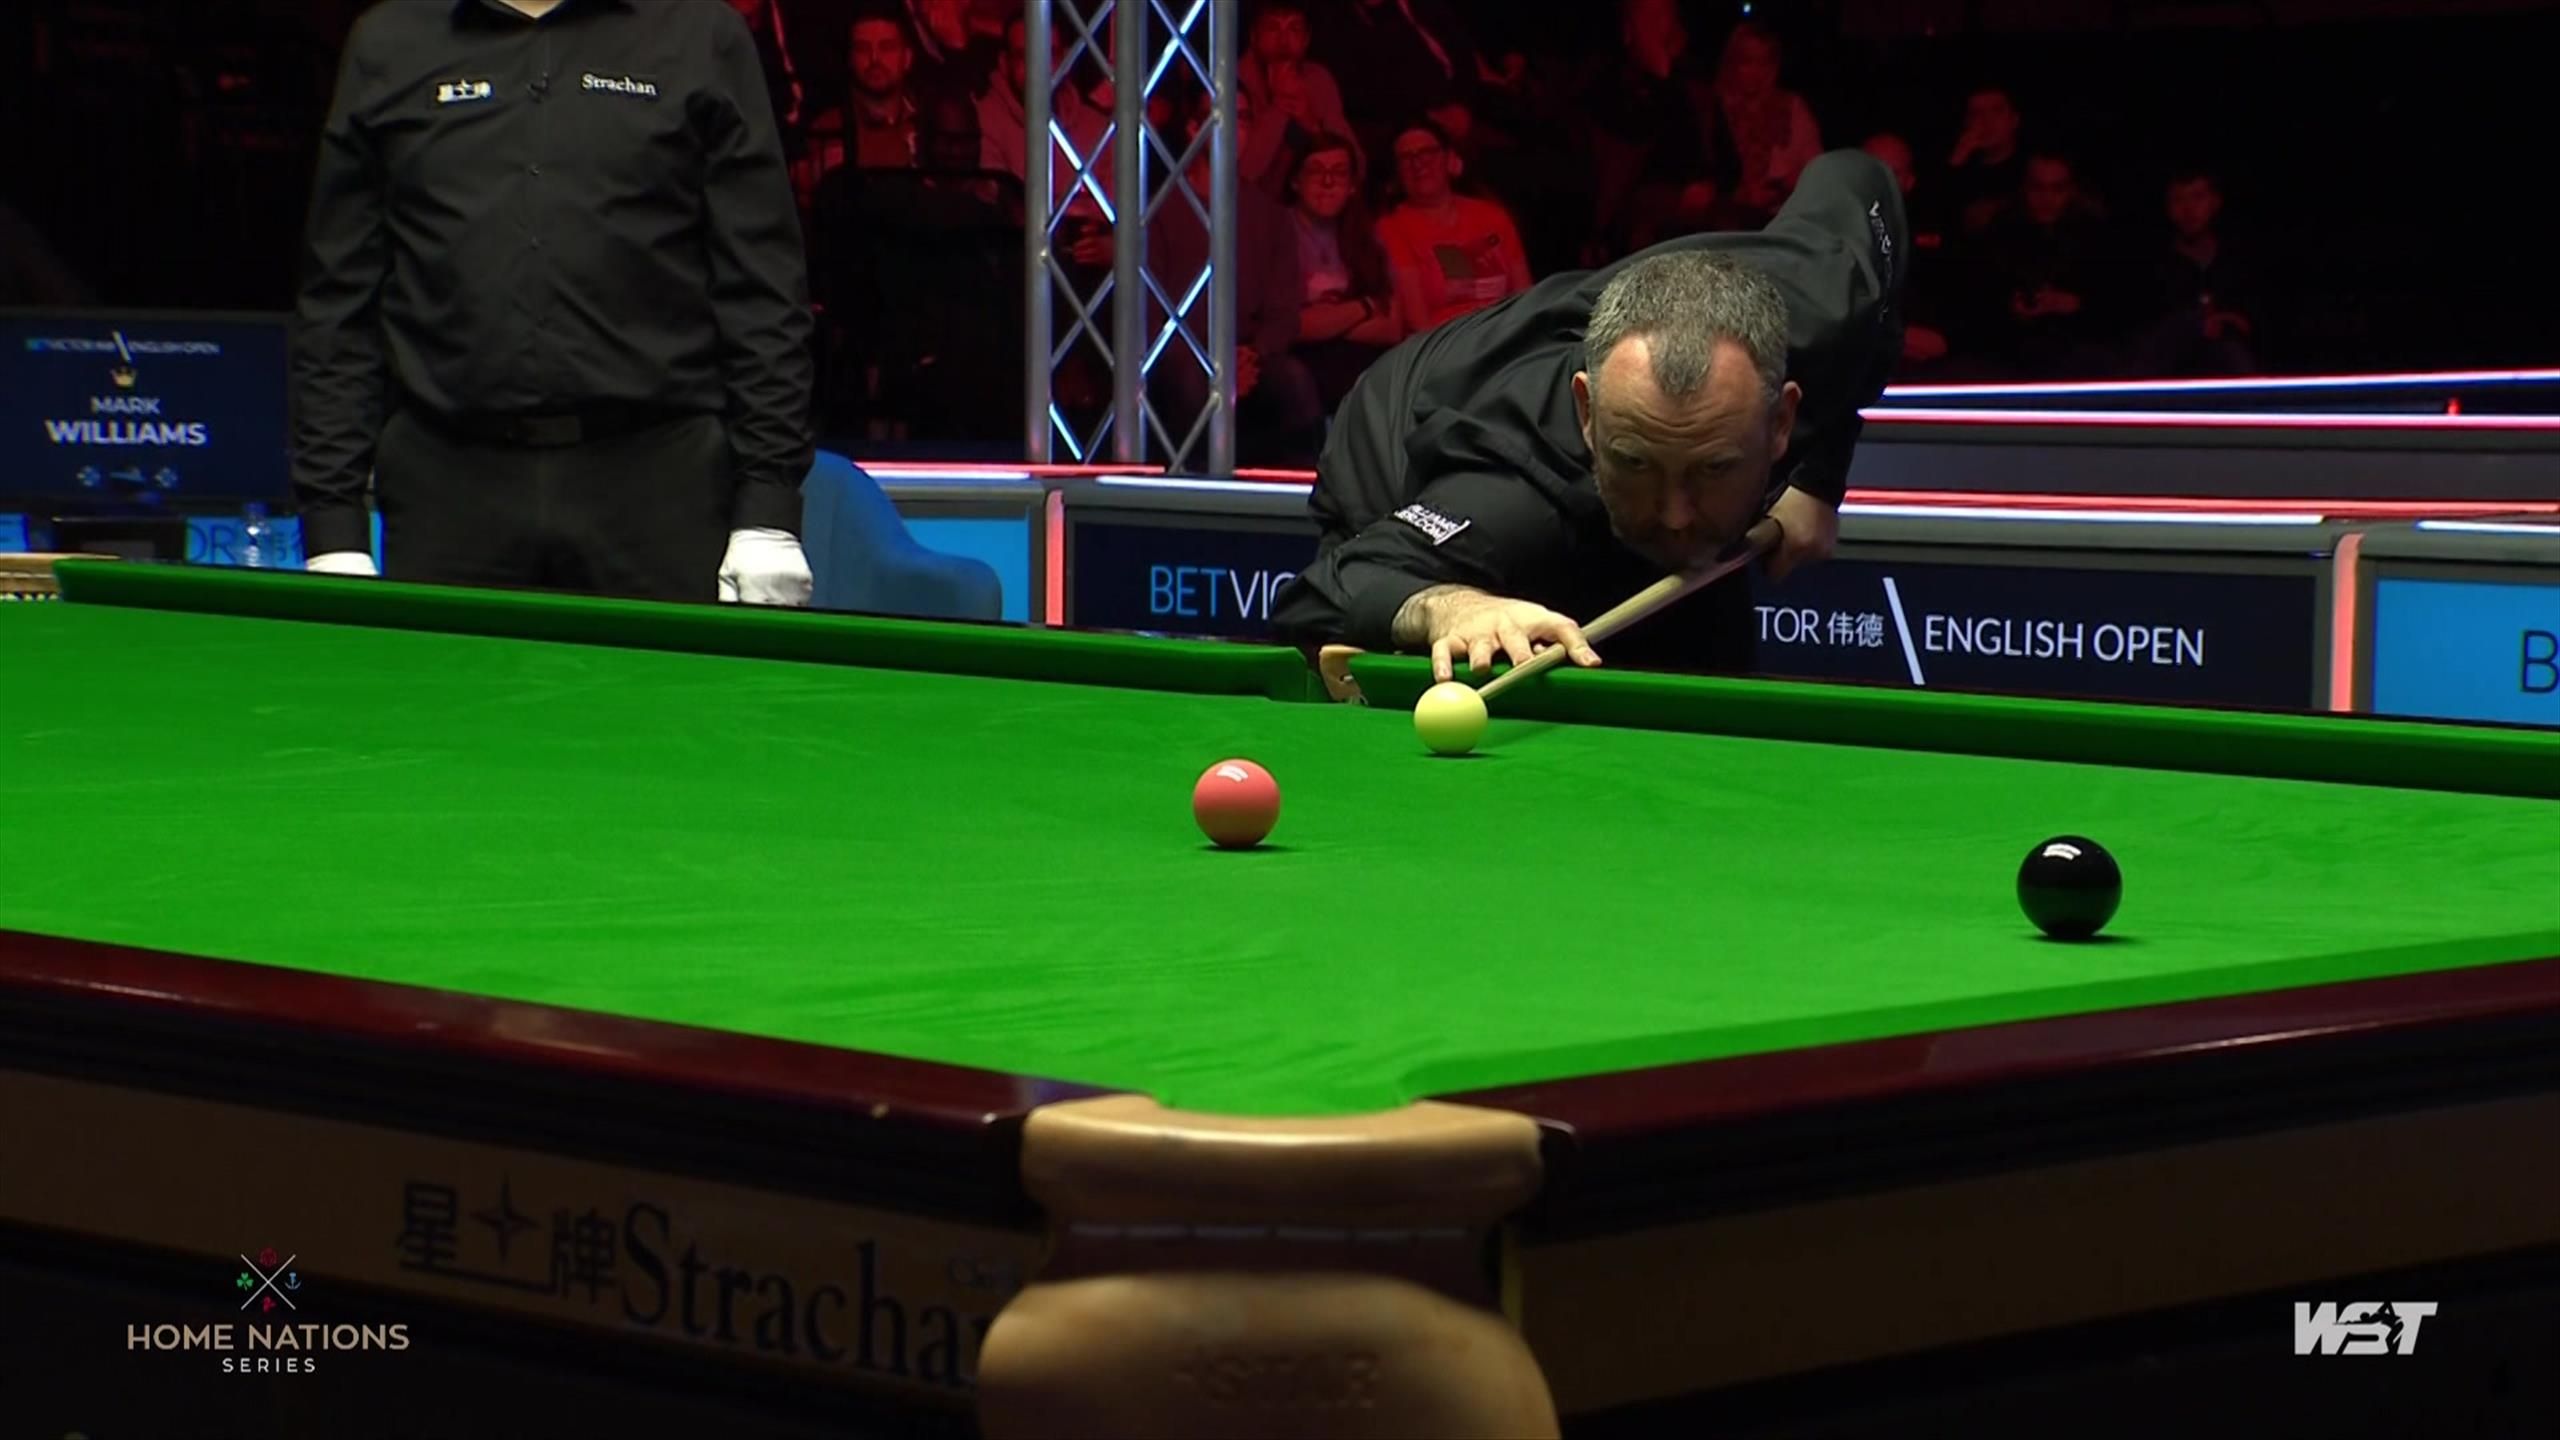 Absolutely brilliant! - Watch Mark Williams remarkable English Open 147 break in full - Snooker video